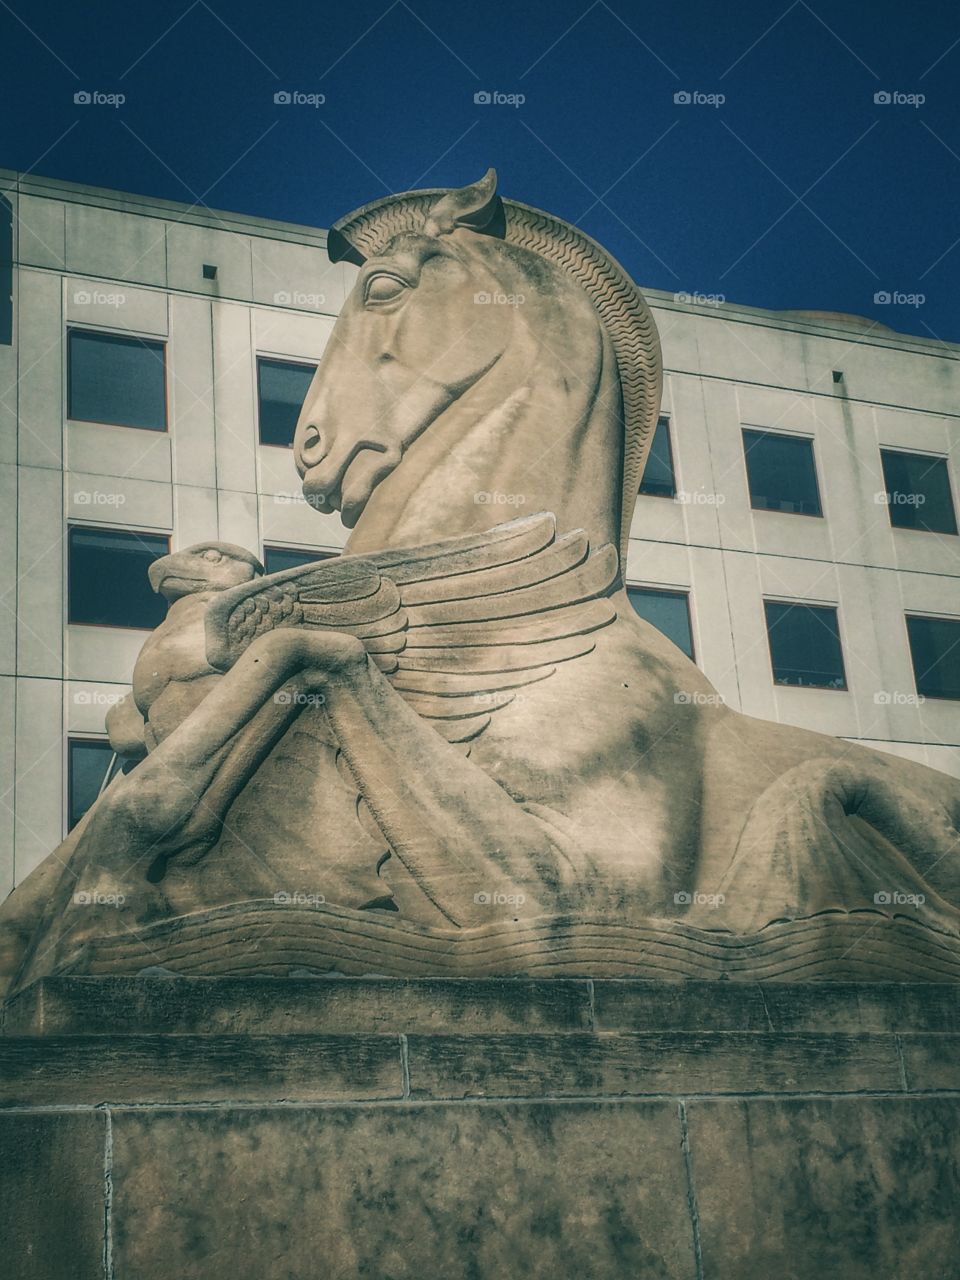 Limestone horse and eagle at the War Memorial building v2